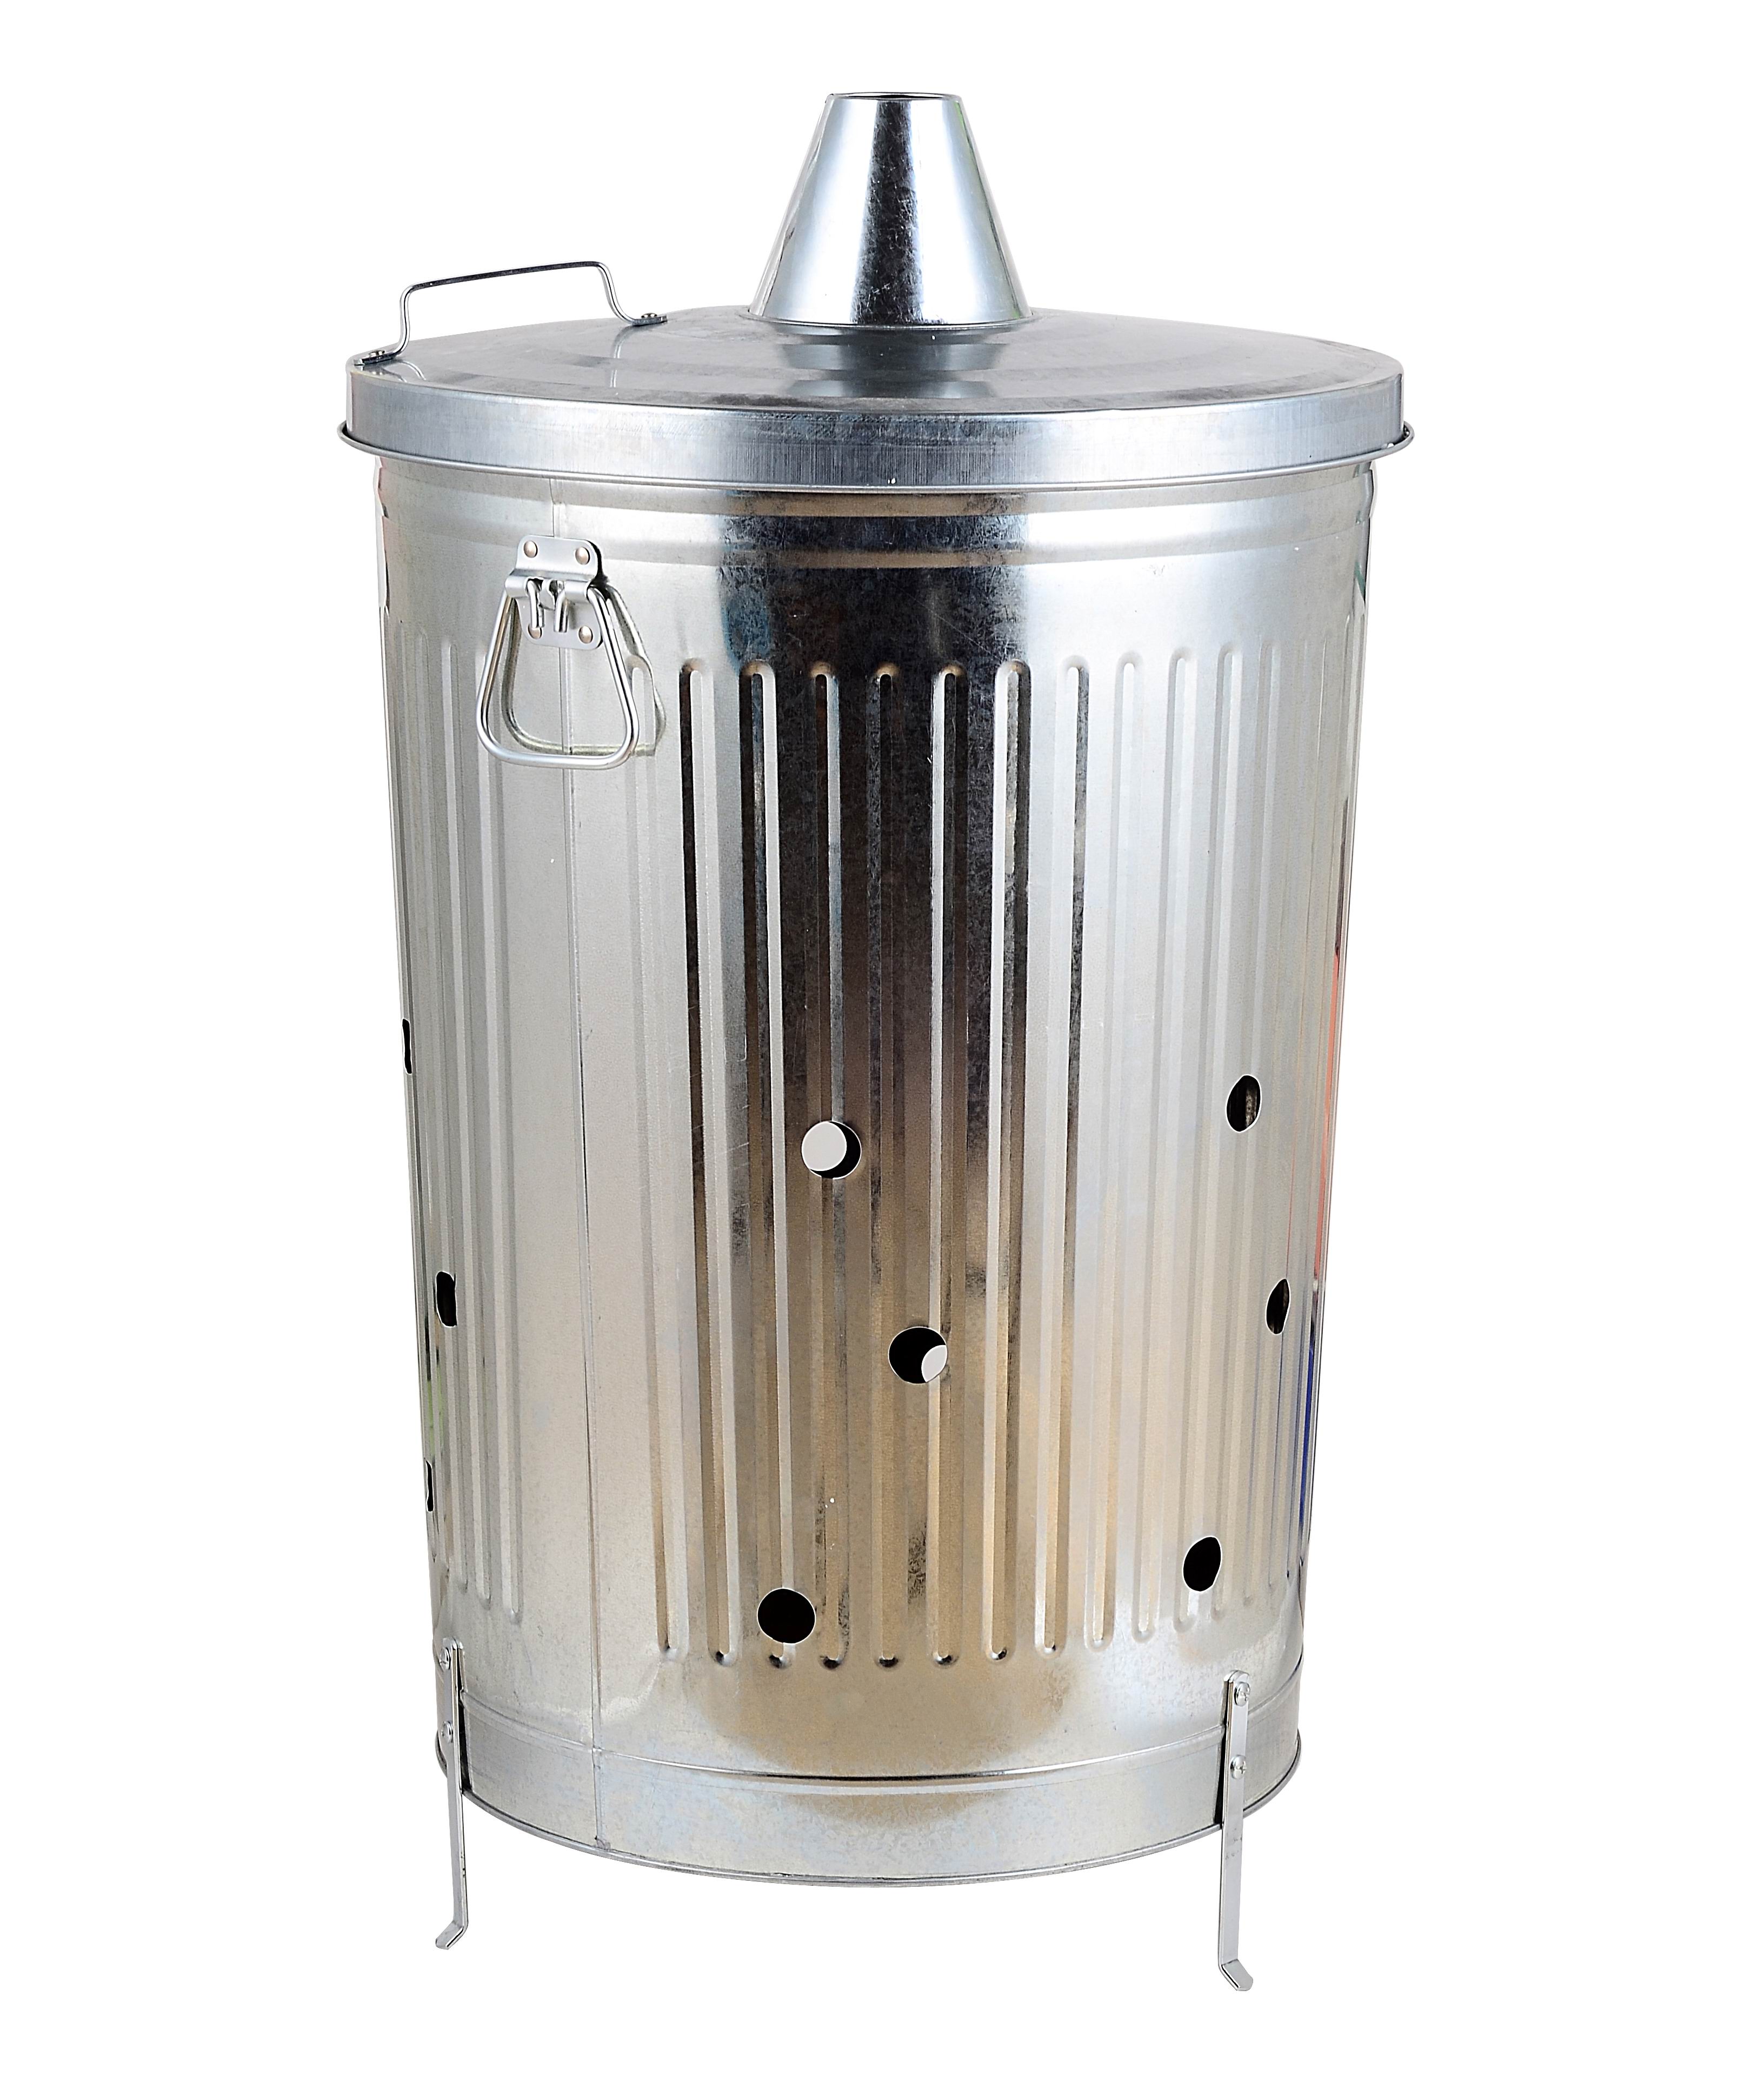 Waste Paper Stainless Steel Burning Barrel Small Fire Cage Burnable Garbage Leaves QILIN Garden Incinerator Four Sizes Gold//Silver//Red